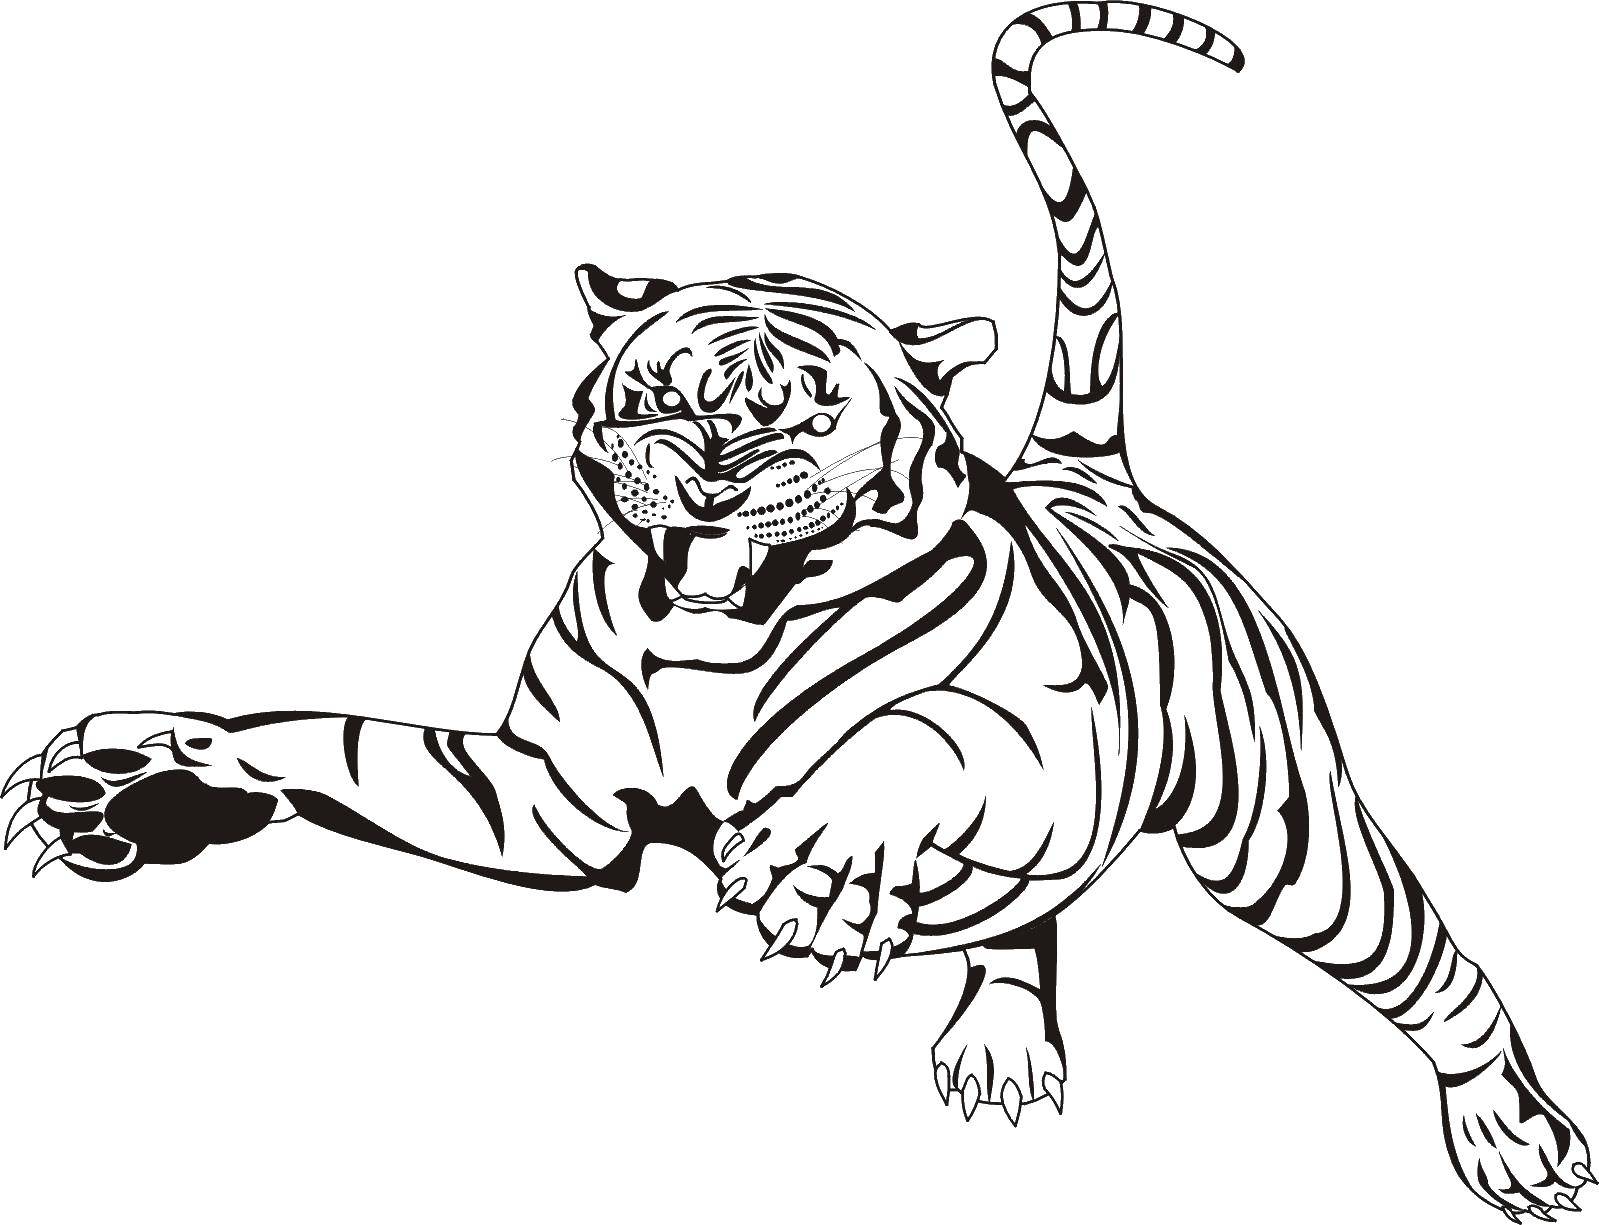 Coloring Tiger jump. Category wild animals. Tags:  tiger claws, paws, tail.